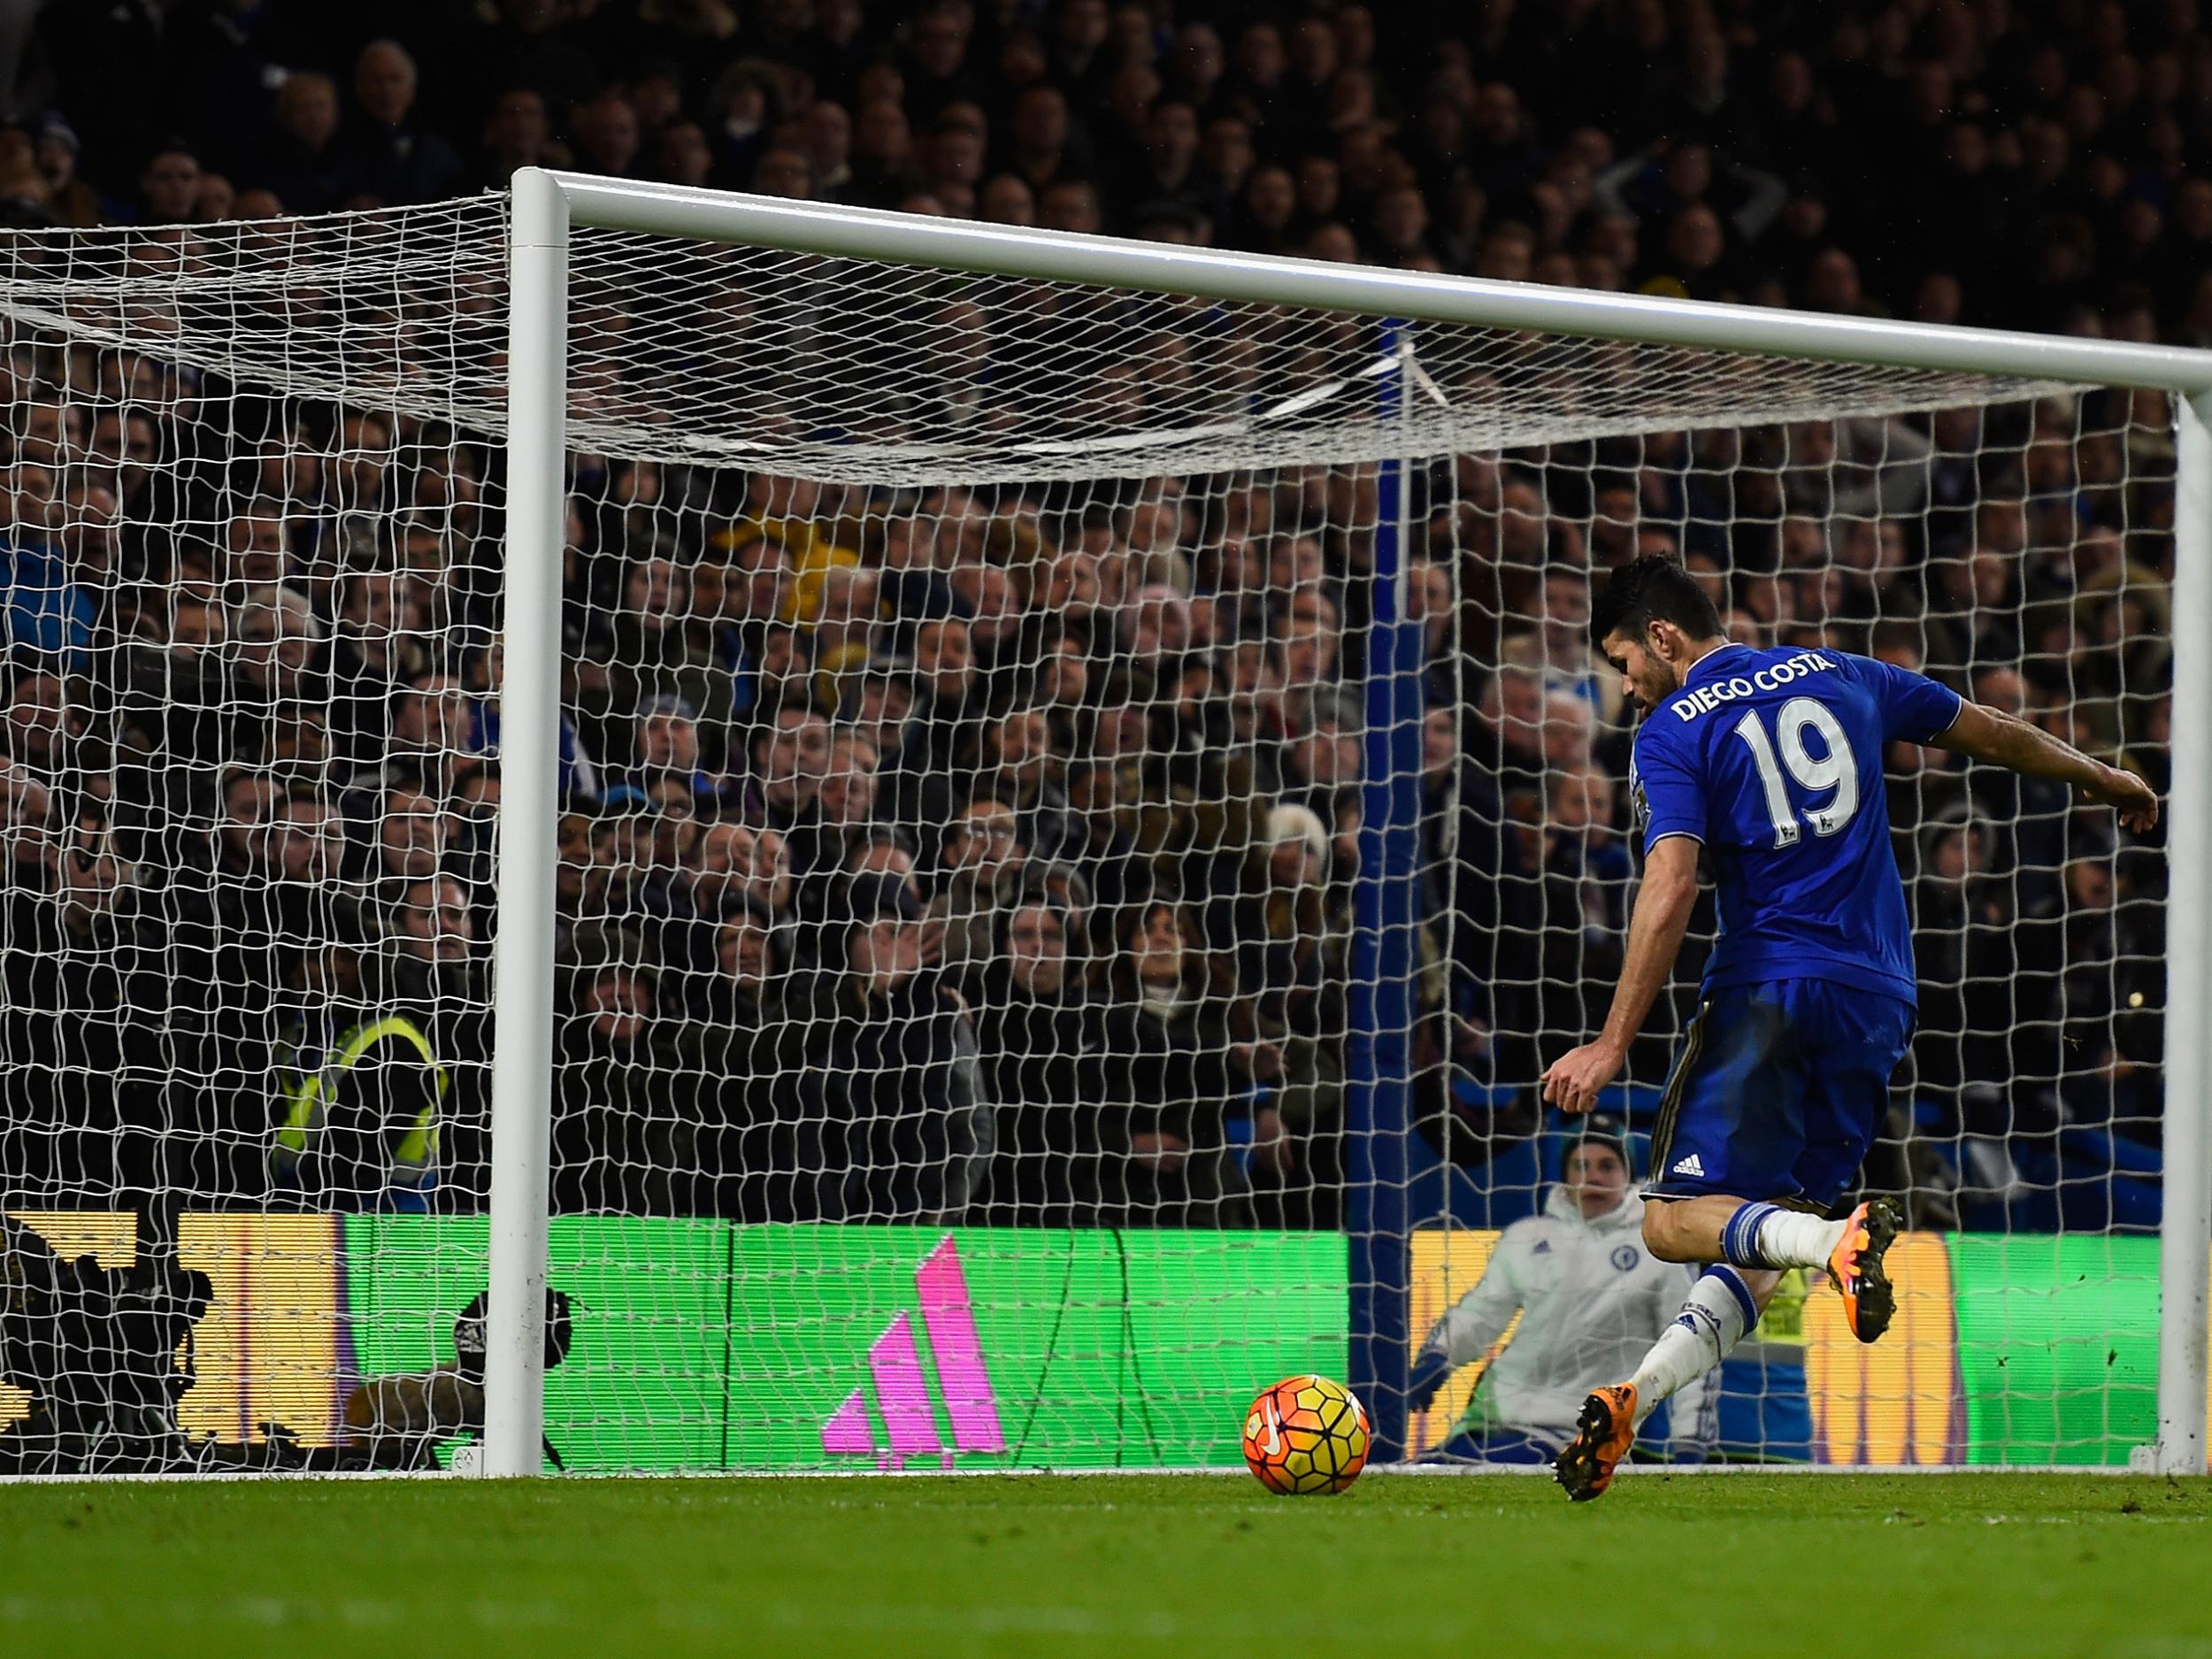 Diego Costa scores late equaliser for Chelsea